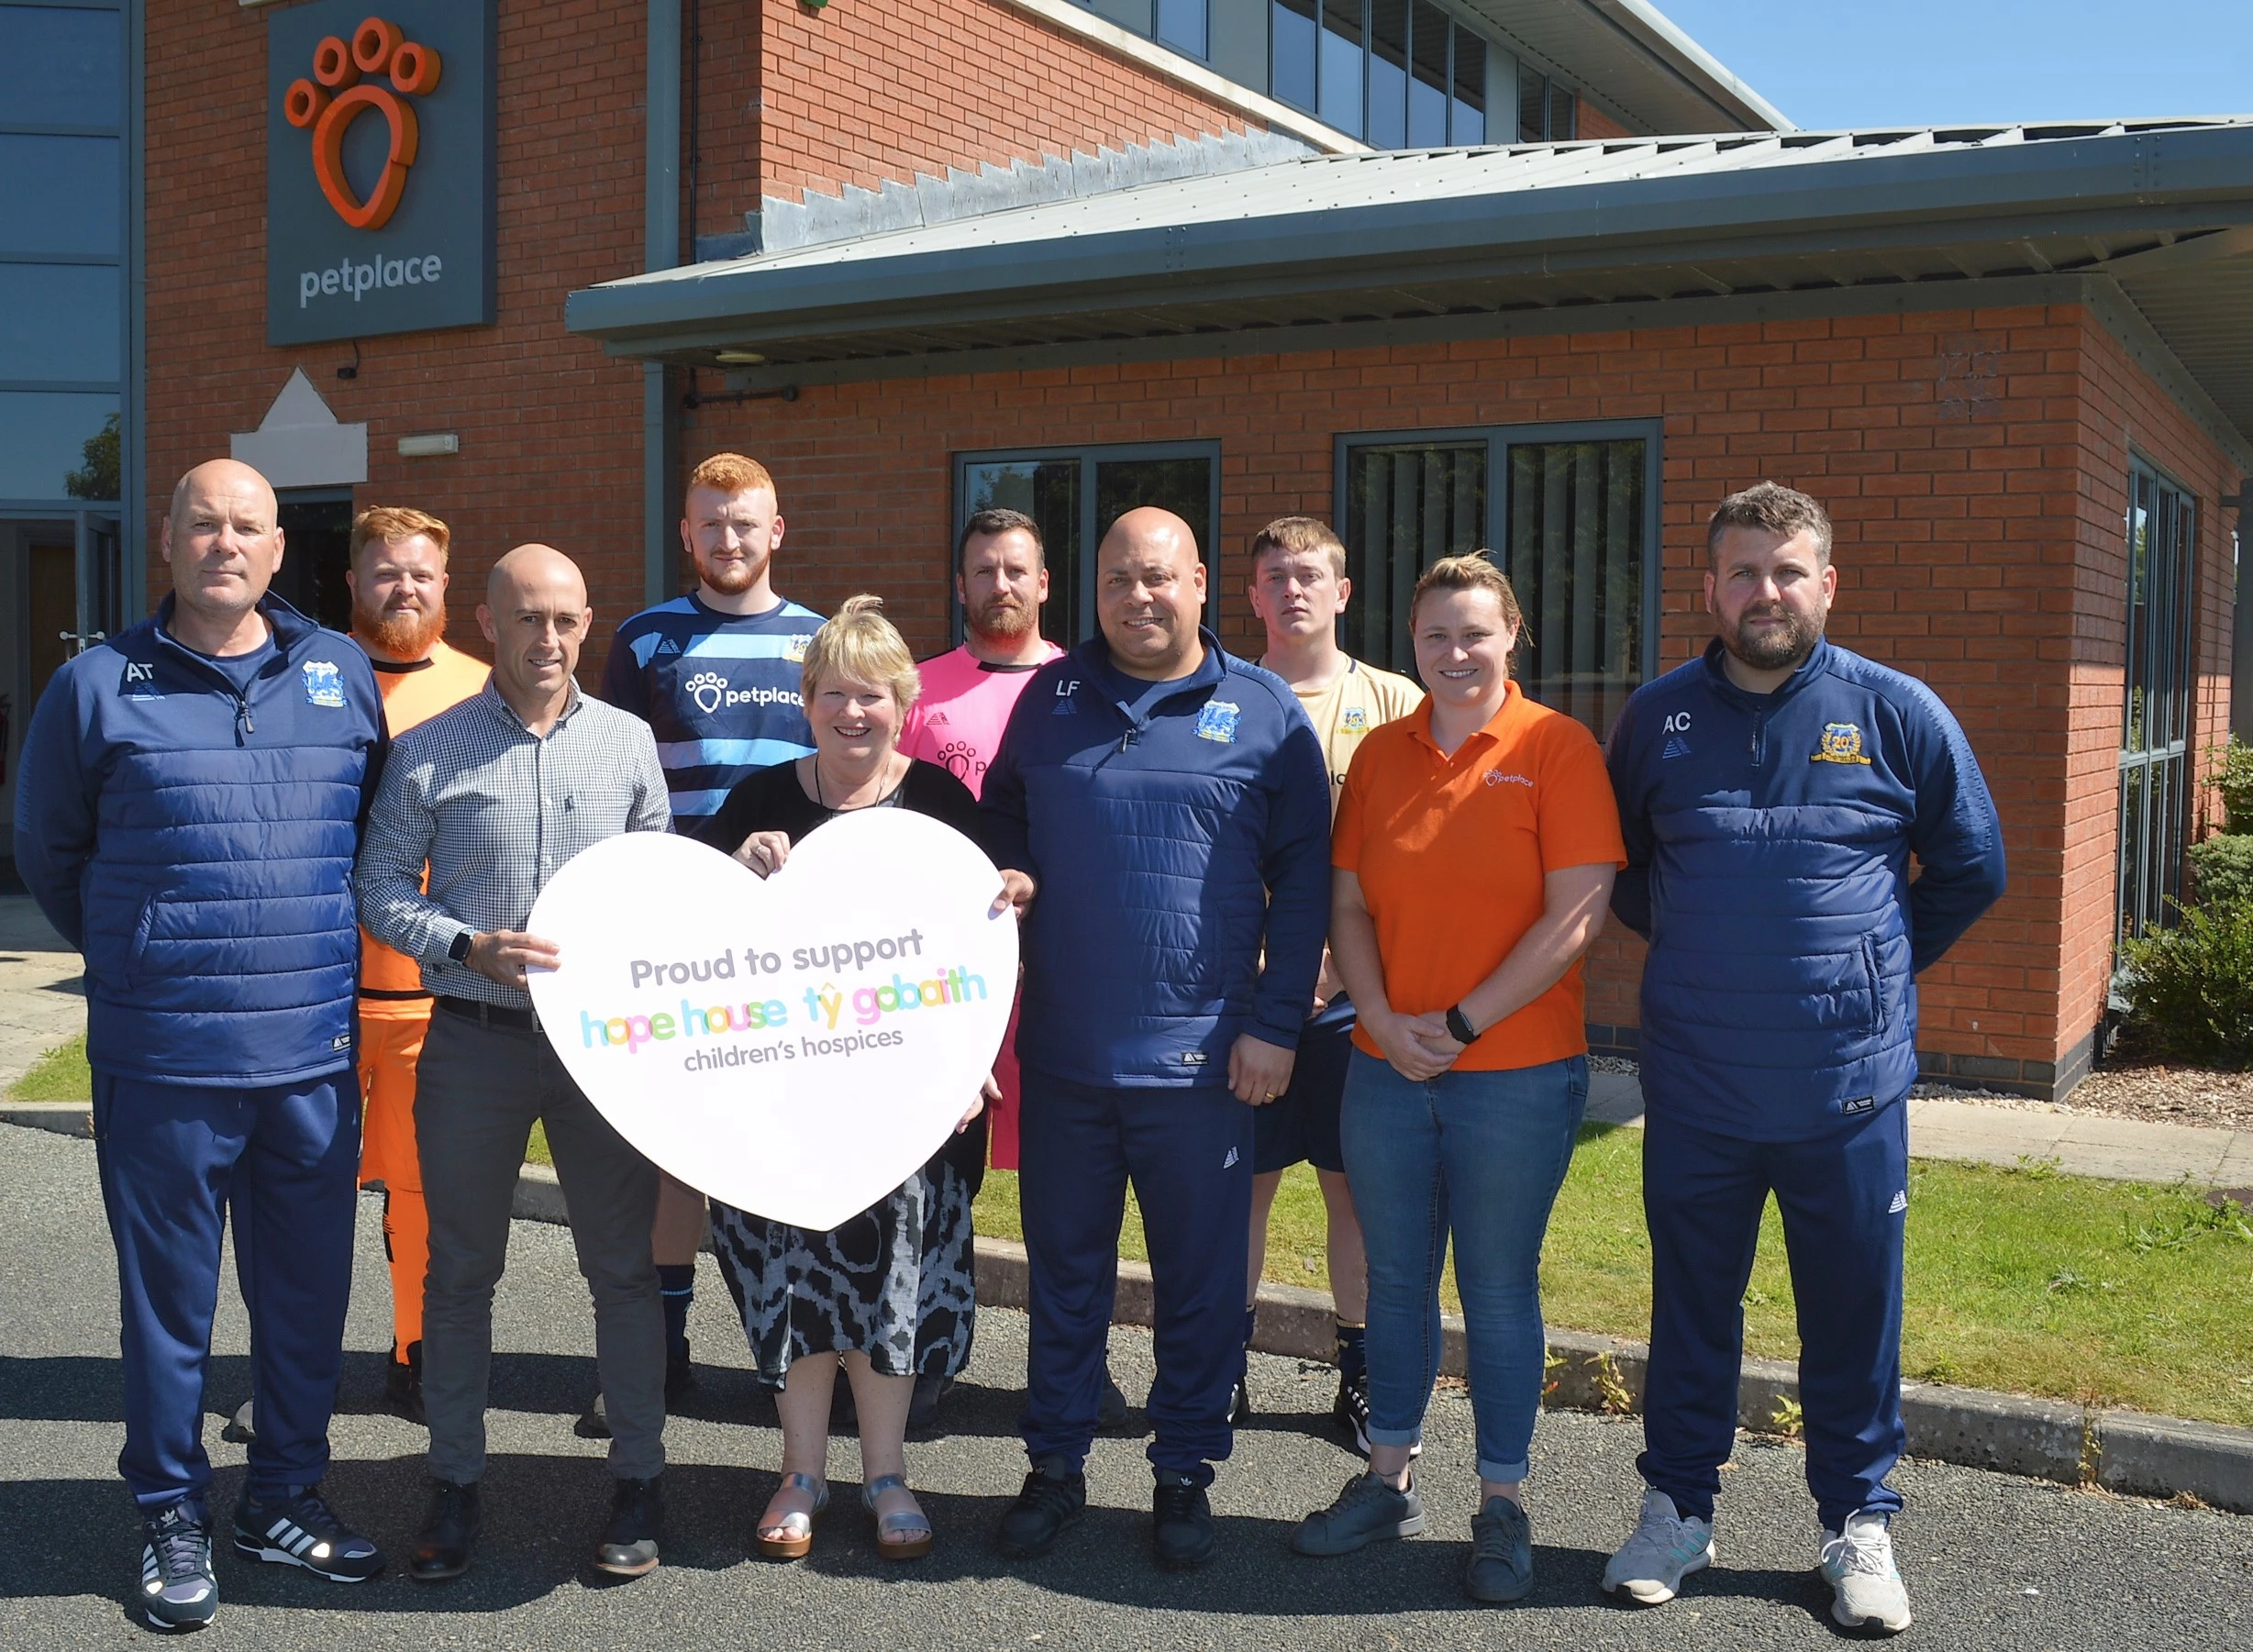 PetPlace, LVL5 Gyms and Kinmel Bay FC unveil new kit and charity partnership